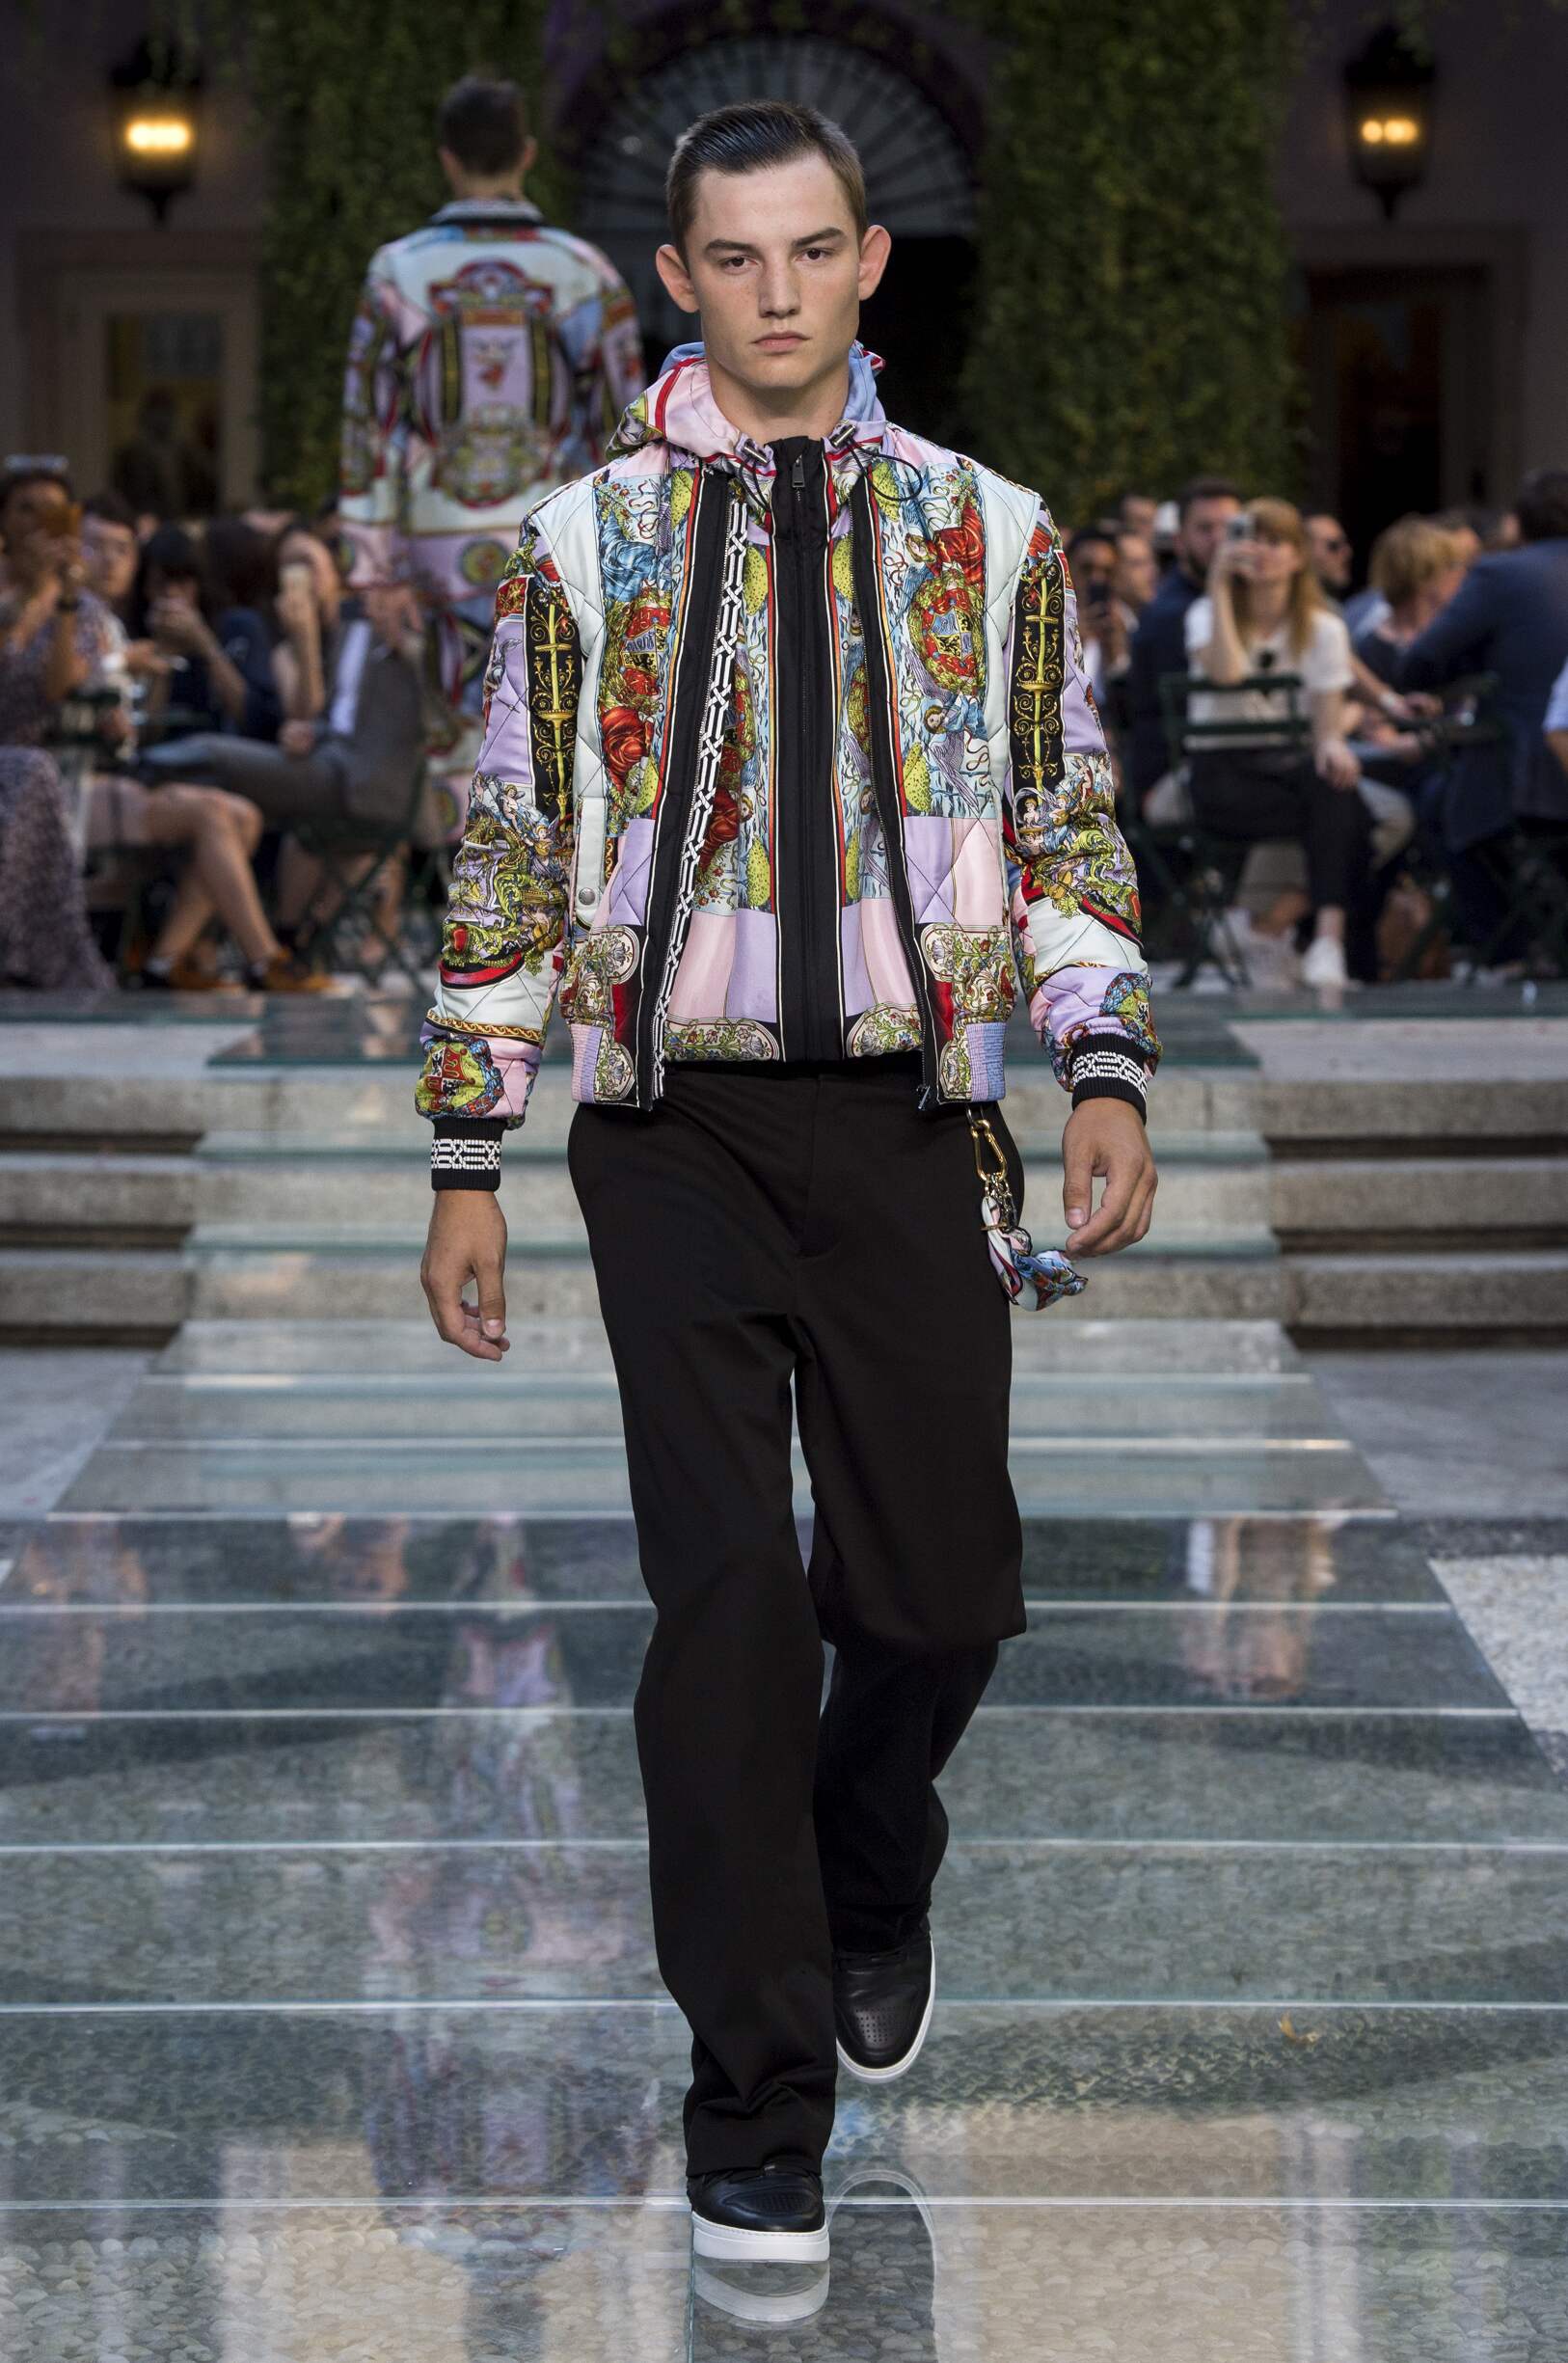 VERSACE FALL WINTER 2017-18 MENS COLLECTION | The Skinny Beep